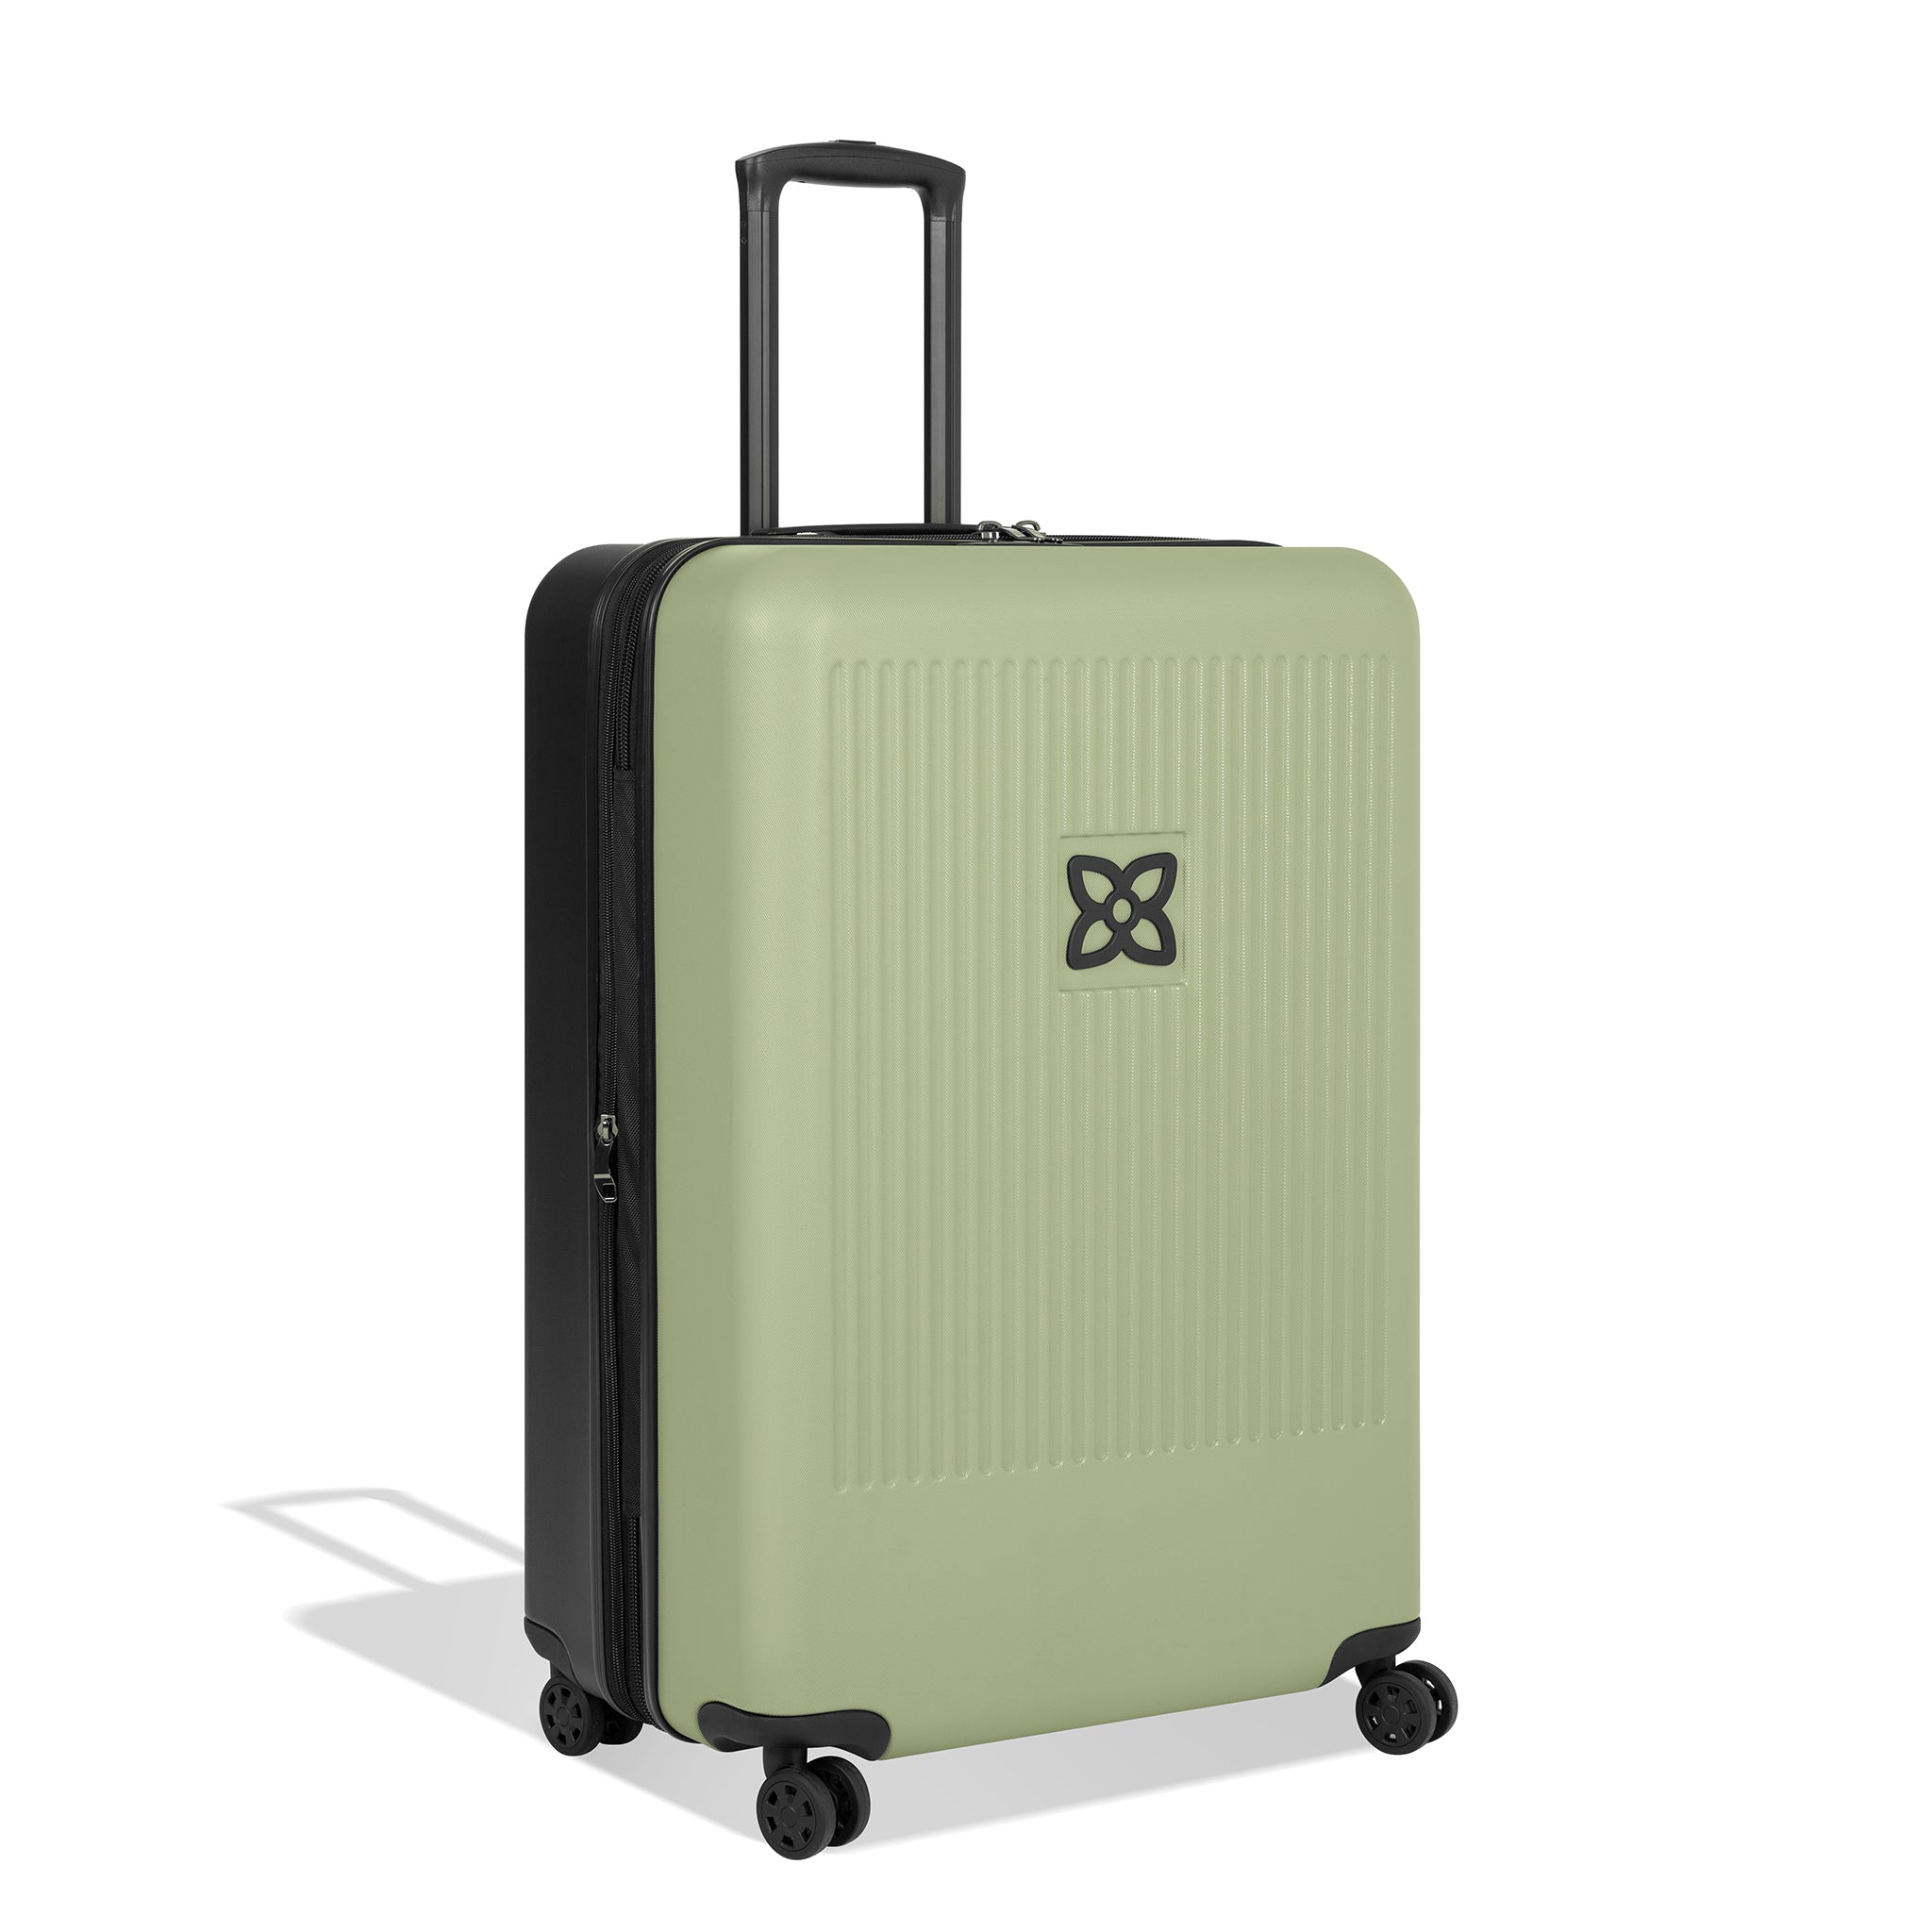 Angled front view of Sherpani hard-shell checked luggage, the Meridian in Sage. Meridian features include a retractable luggage handle, uncrushable exterior, TSA-approved locking zippers and four 36-degree spinner wheels. The Sage color is two-toned with the front of the suitcase in sage green and the back in classic black. 